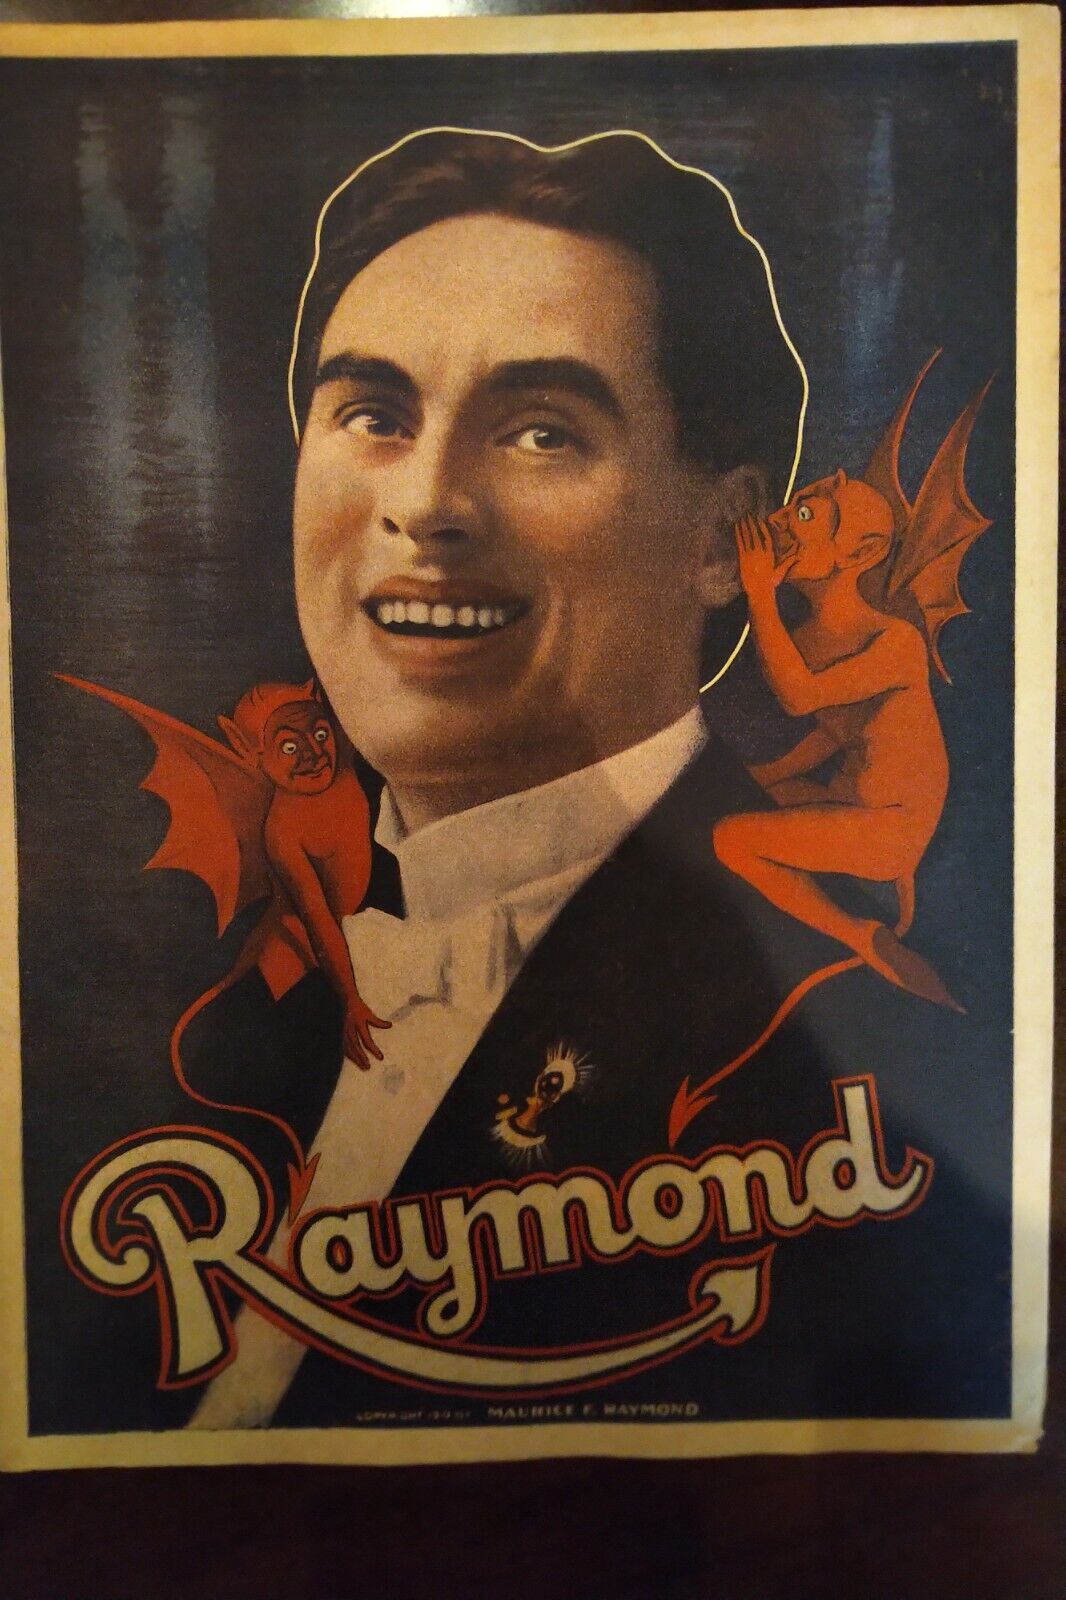 Original Window Poster from The Great Raymond Show